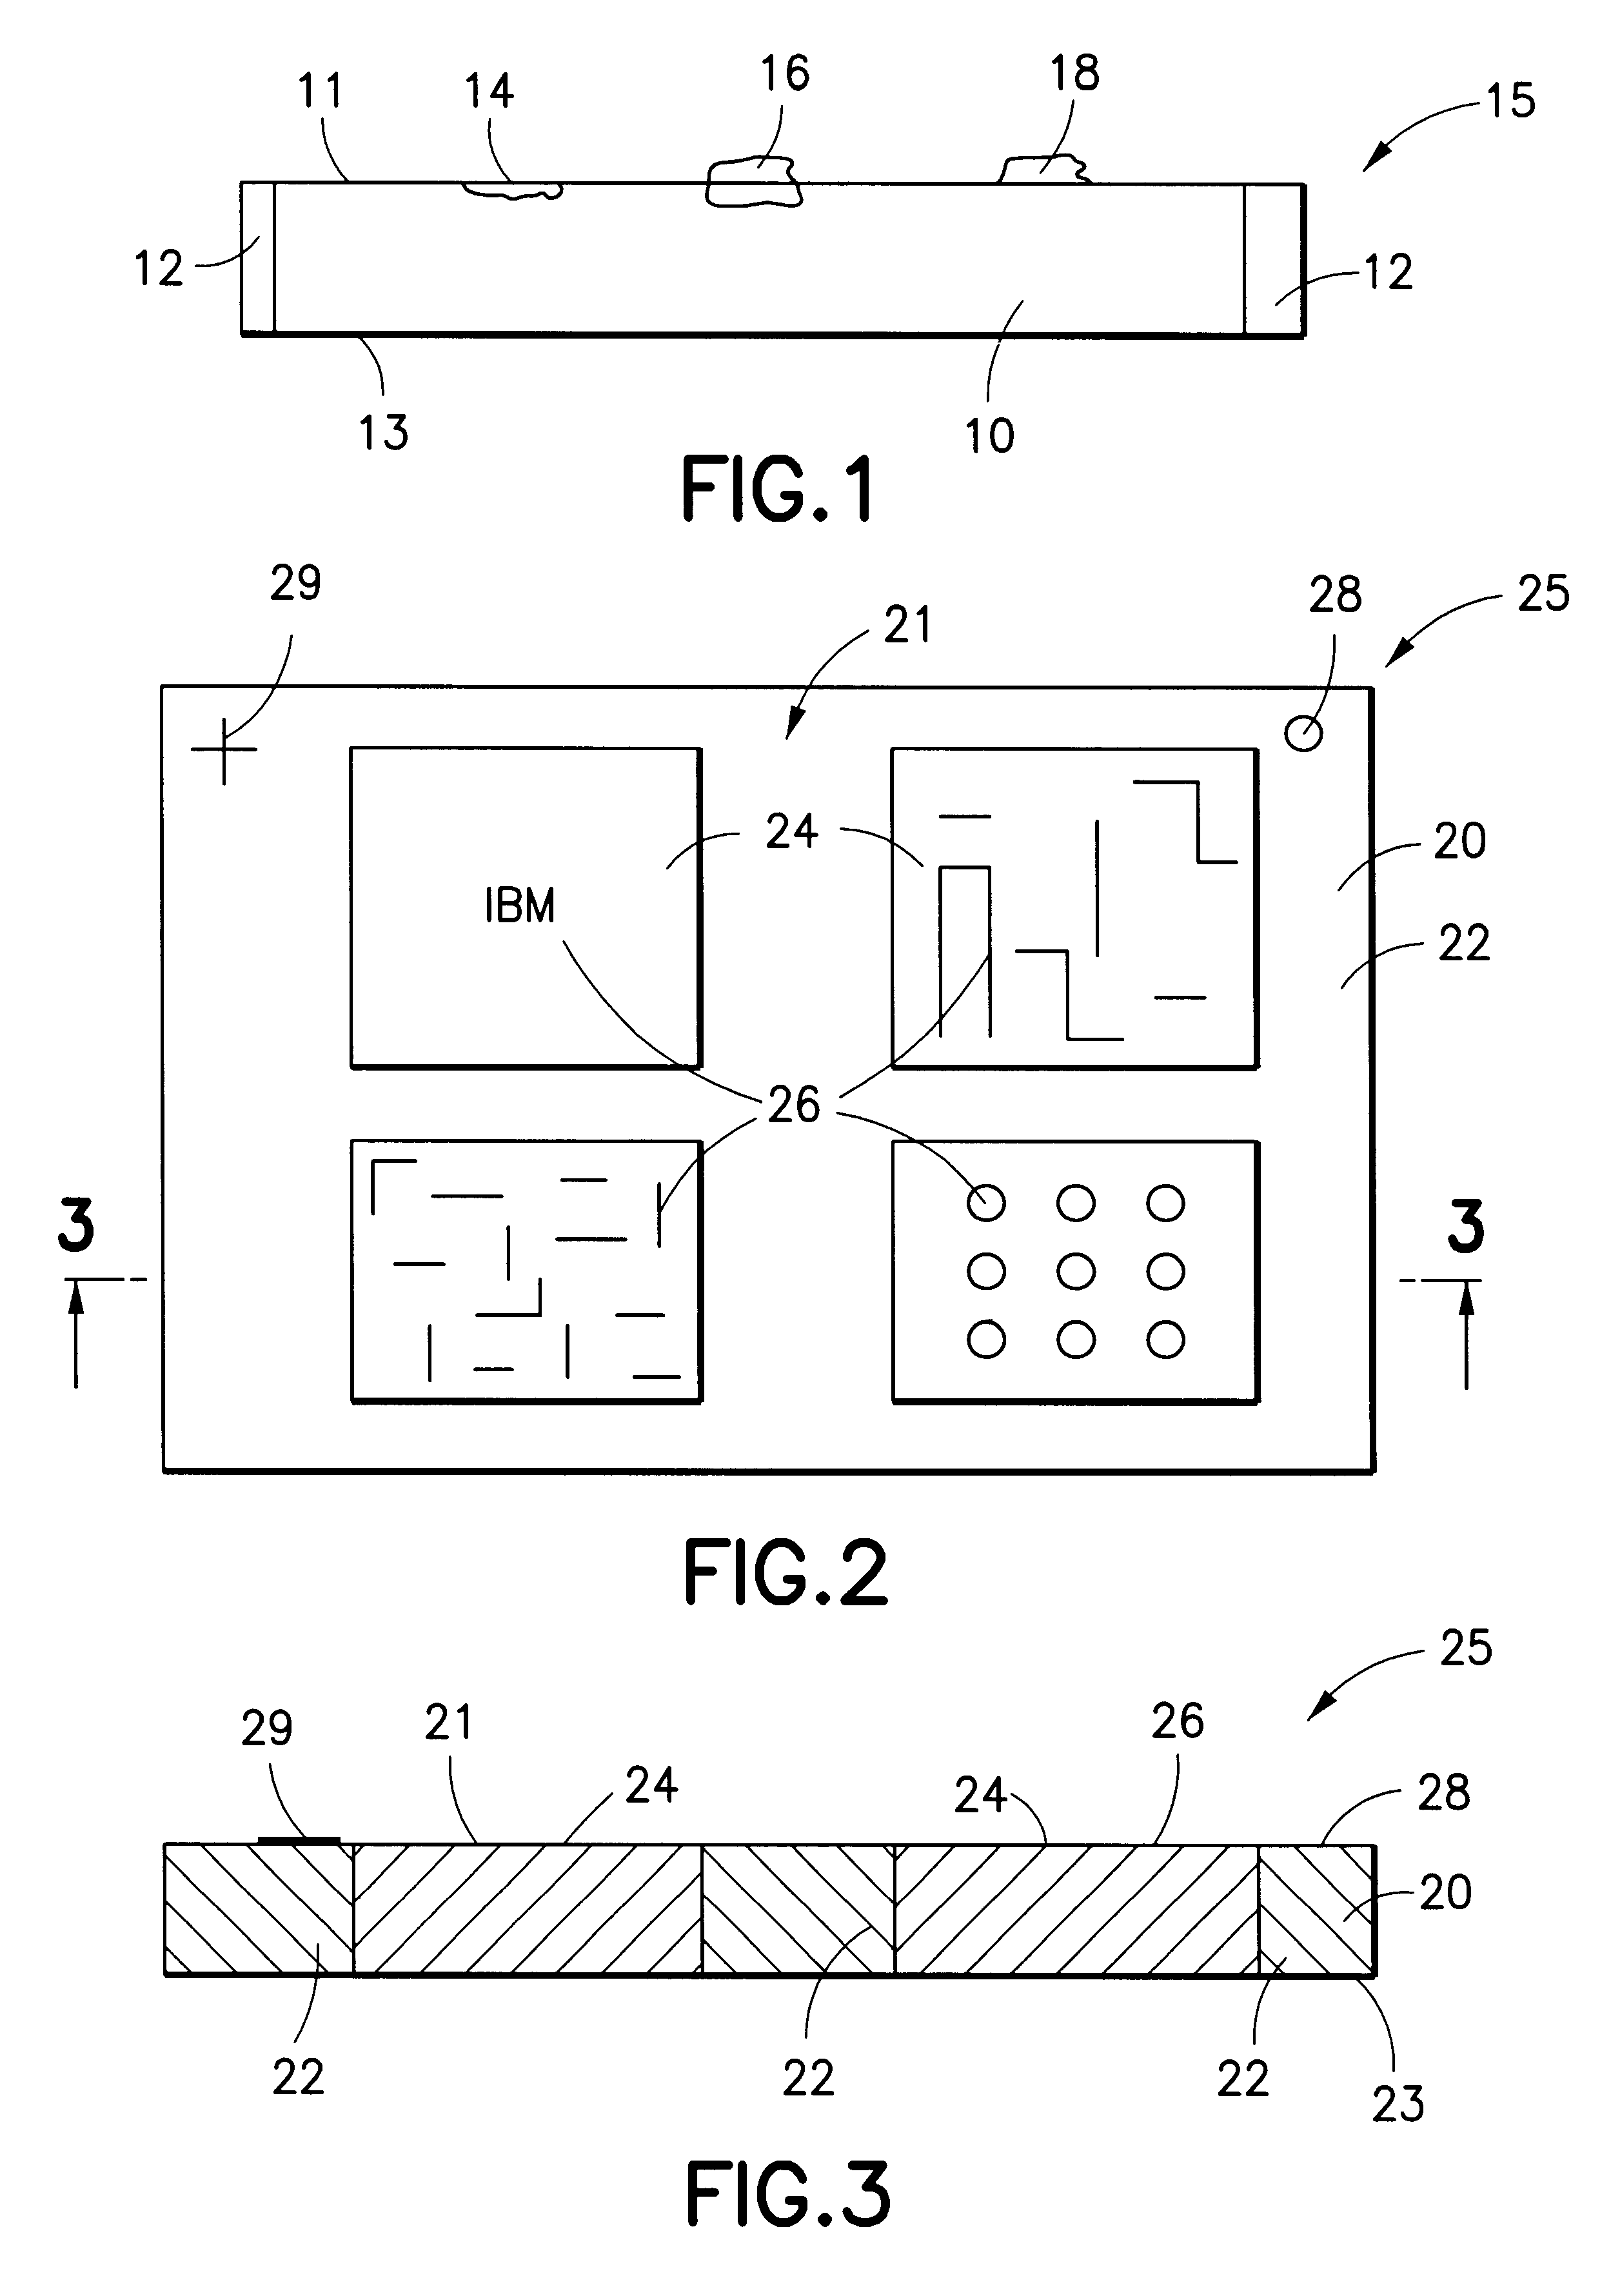 Method of forming defect-free ceramic structures using thermally depolymerizable surface layer